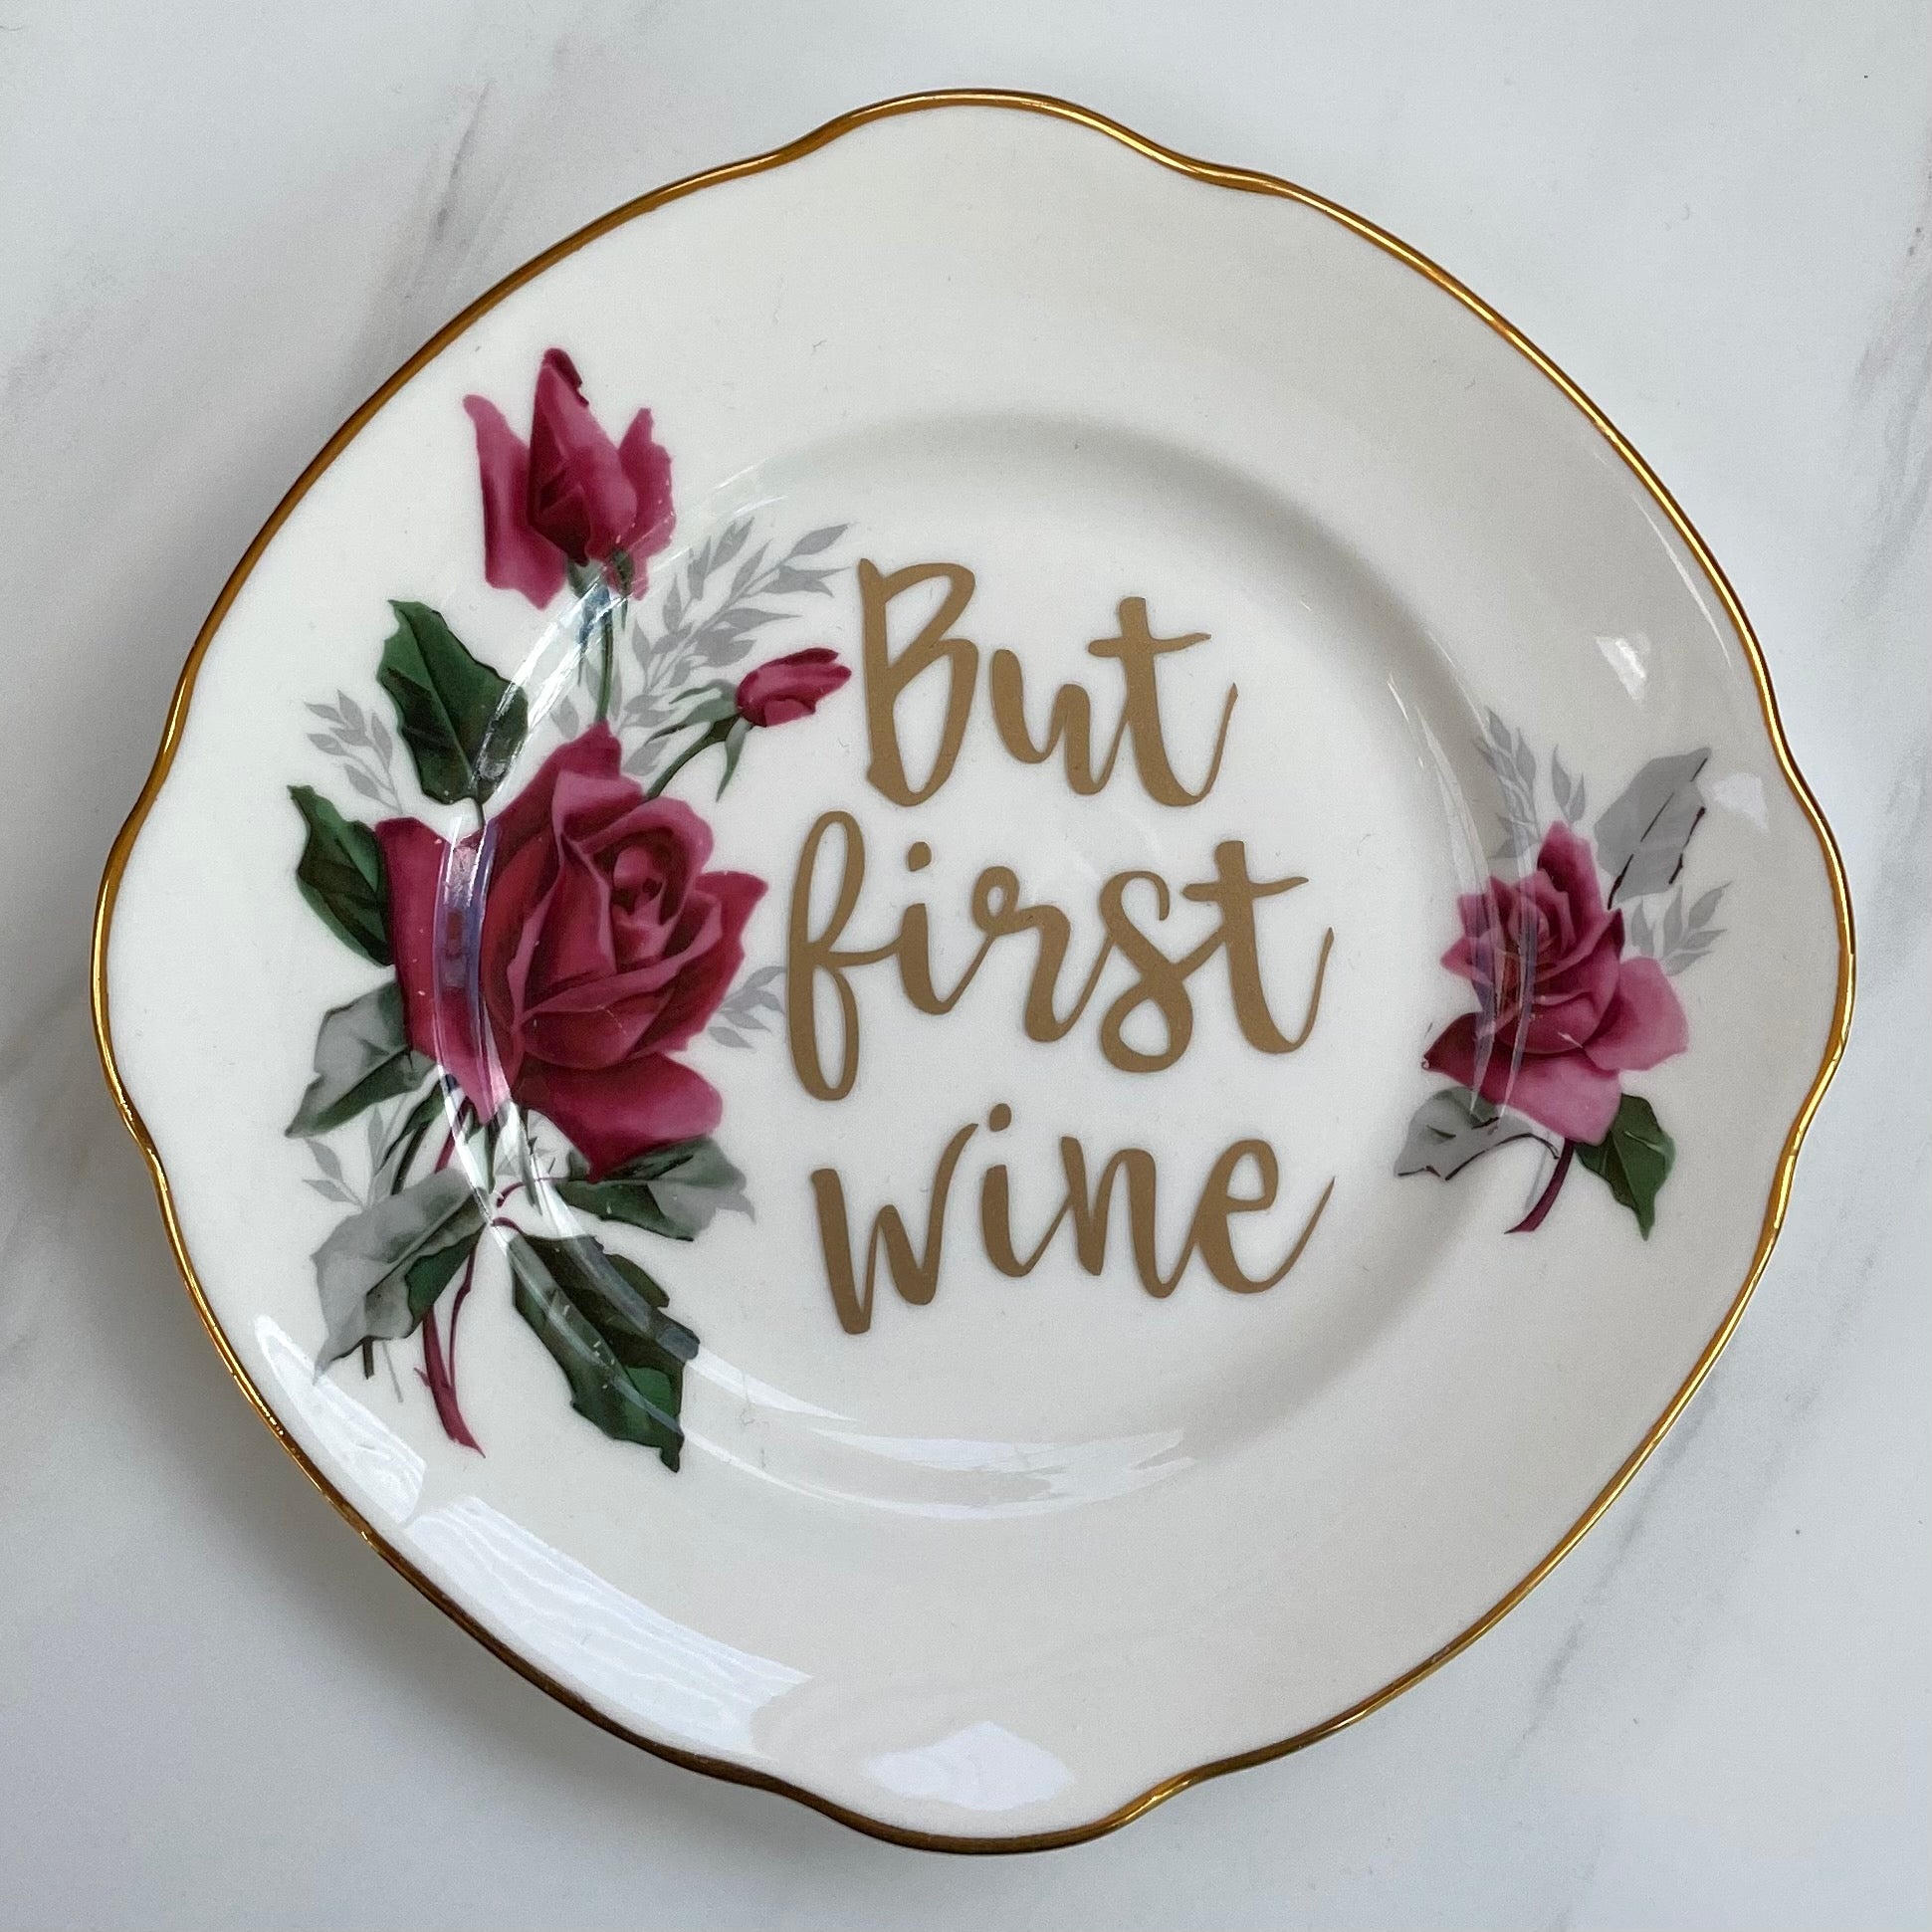 ‘But first wine’ quote on plate